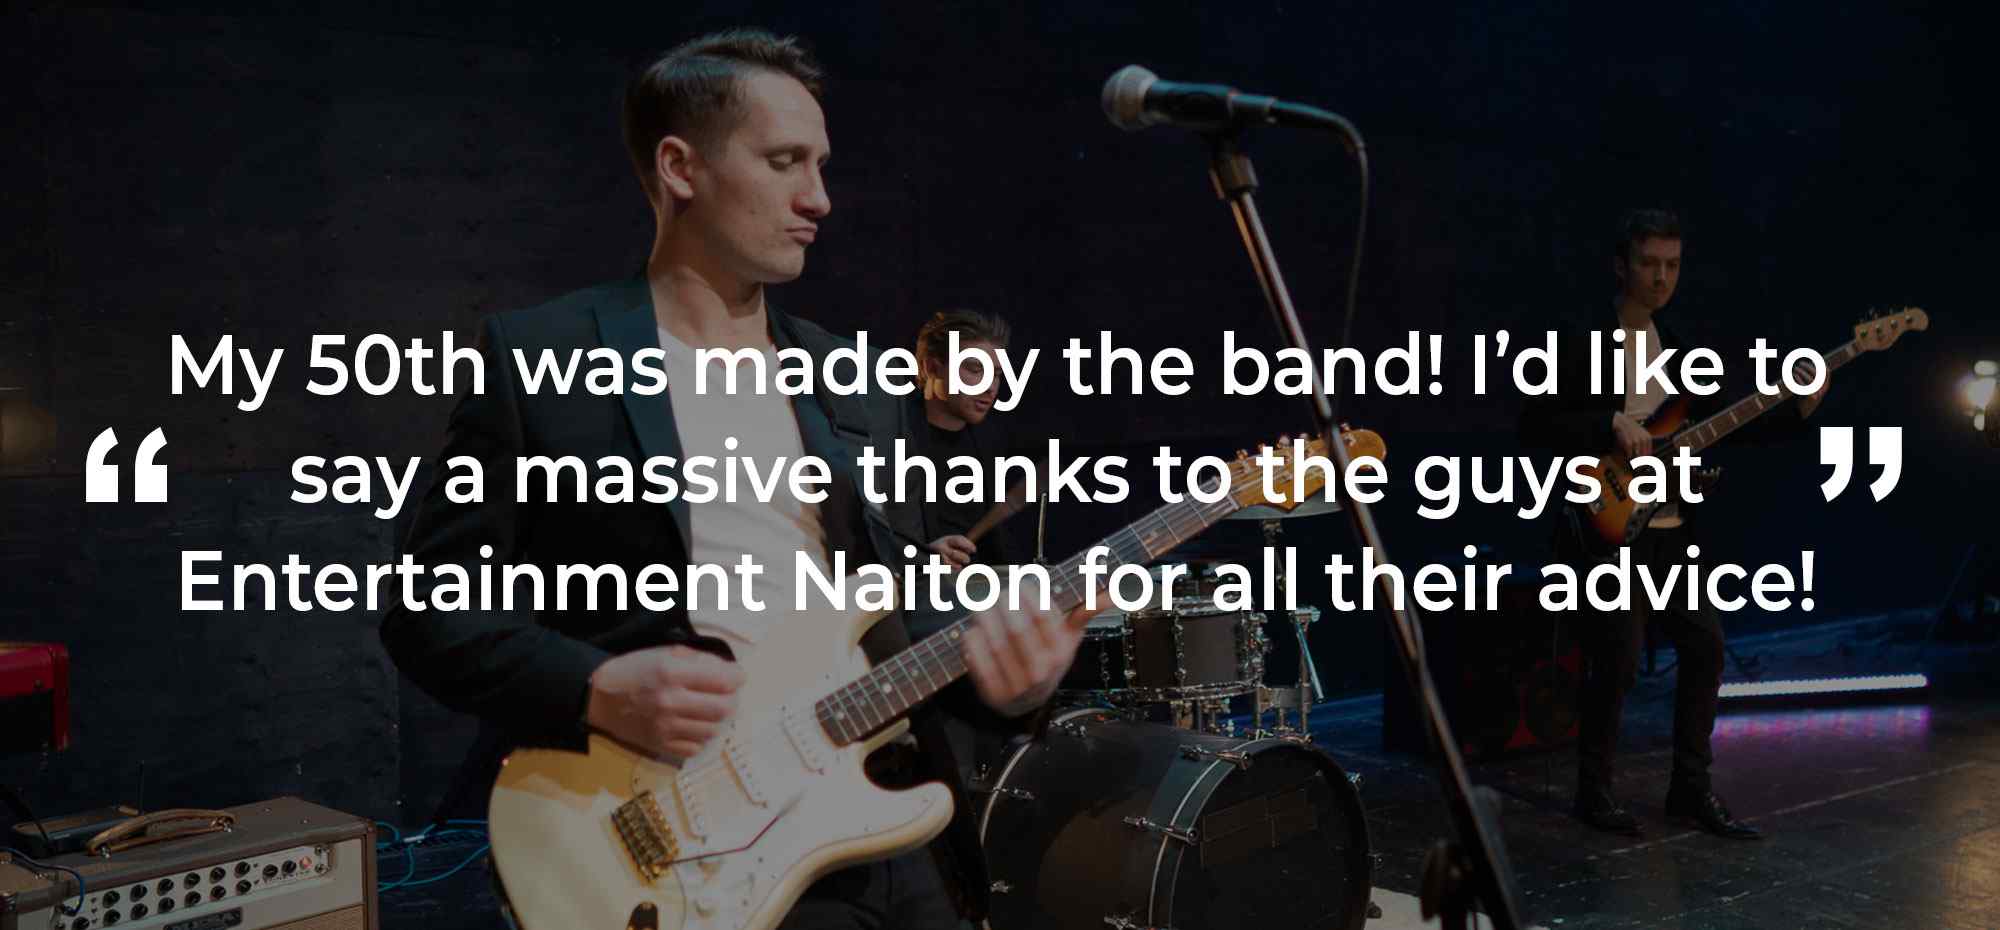 Client Review of a Party Band Nottinghamshire